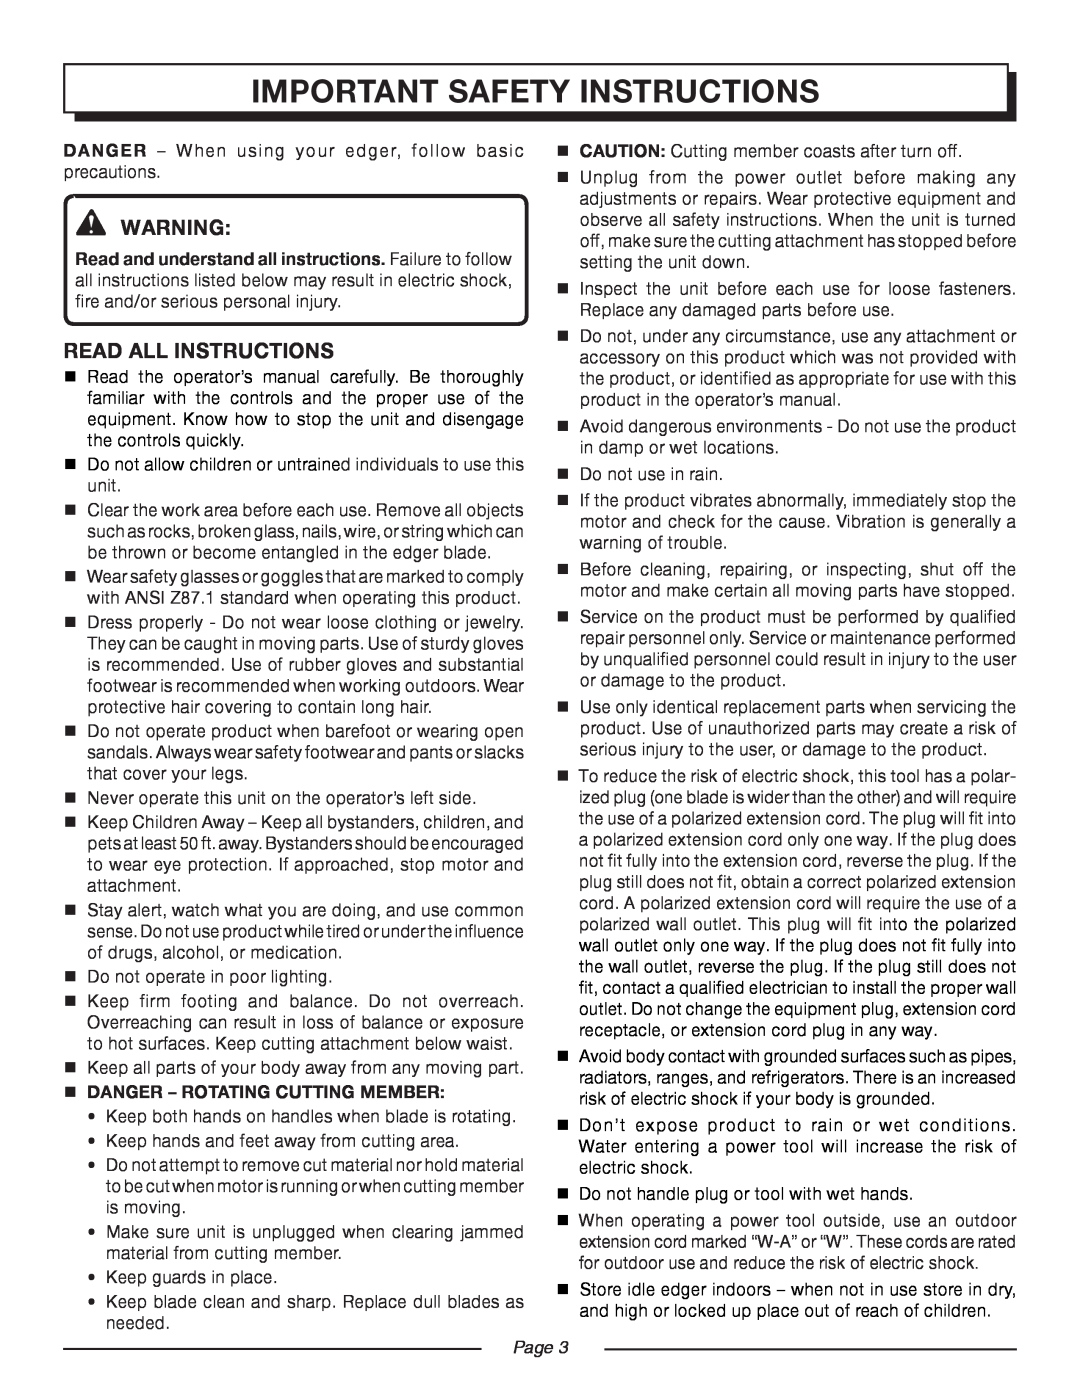 Homelite UT45100 manual important safety instructions, read all instructions,  DANGER - Rotating Cutting MEMBER, Page  